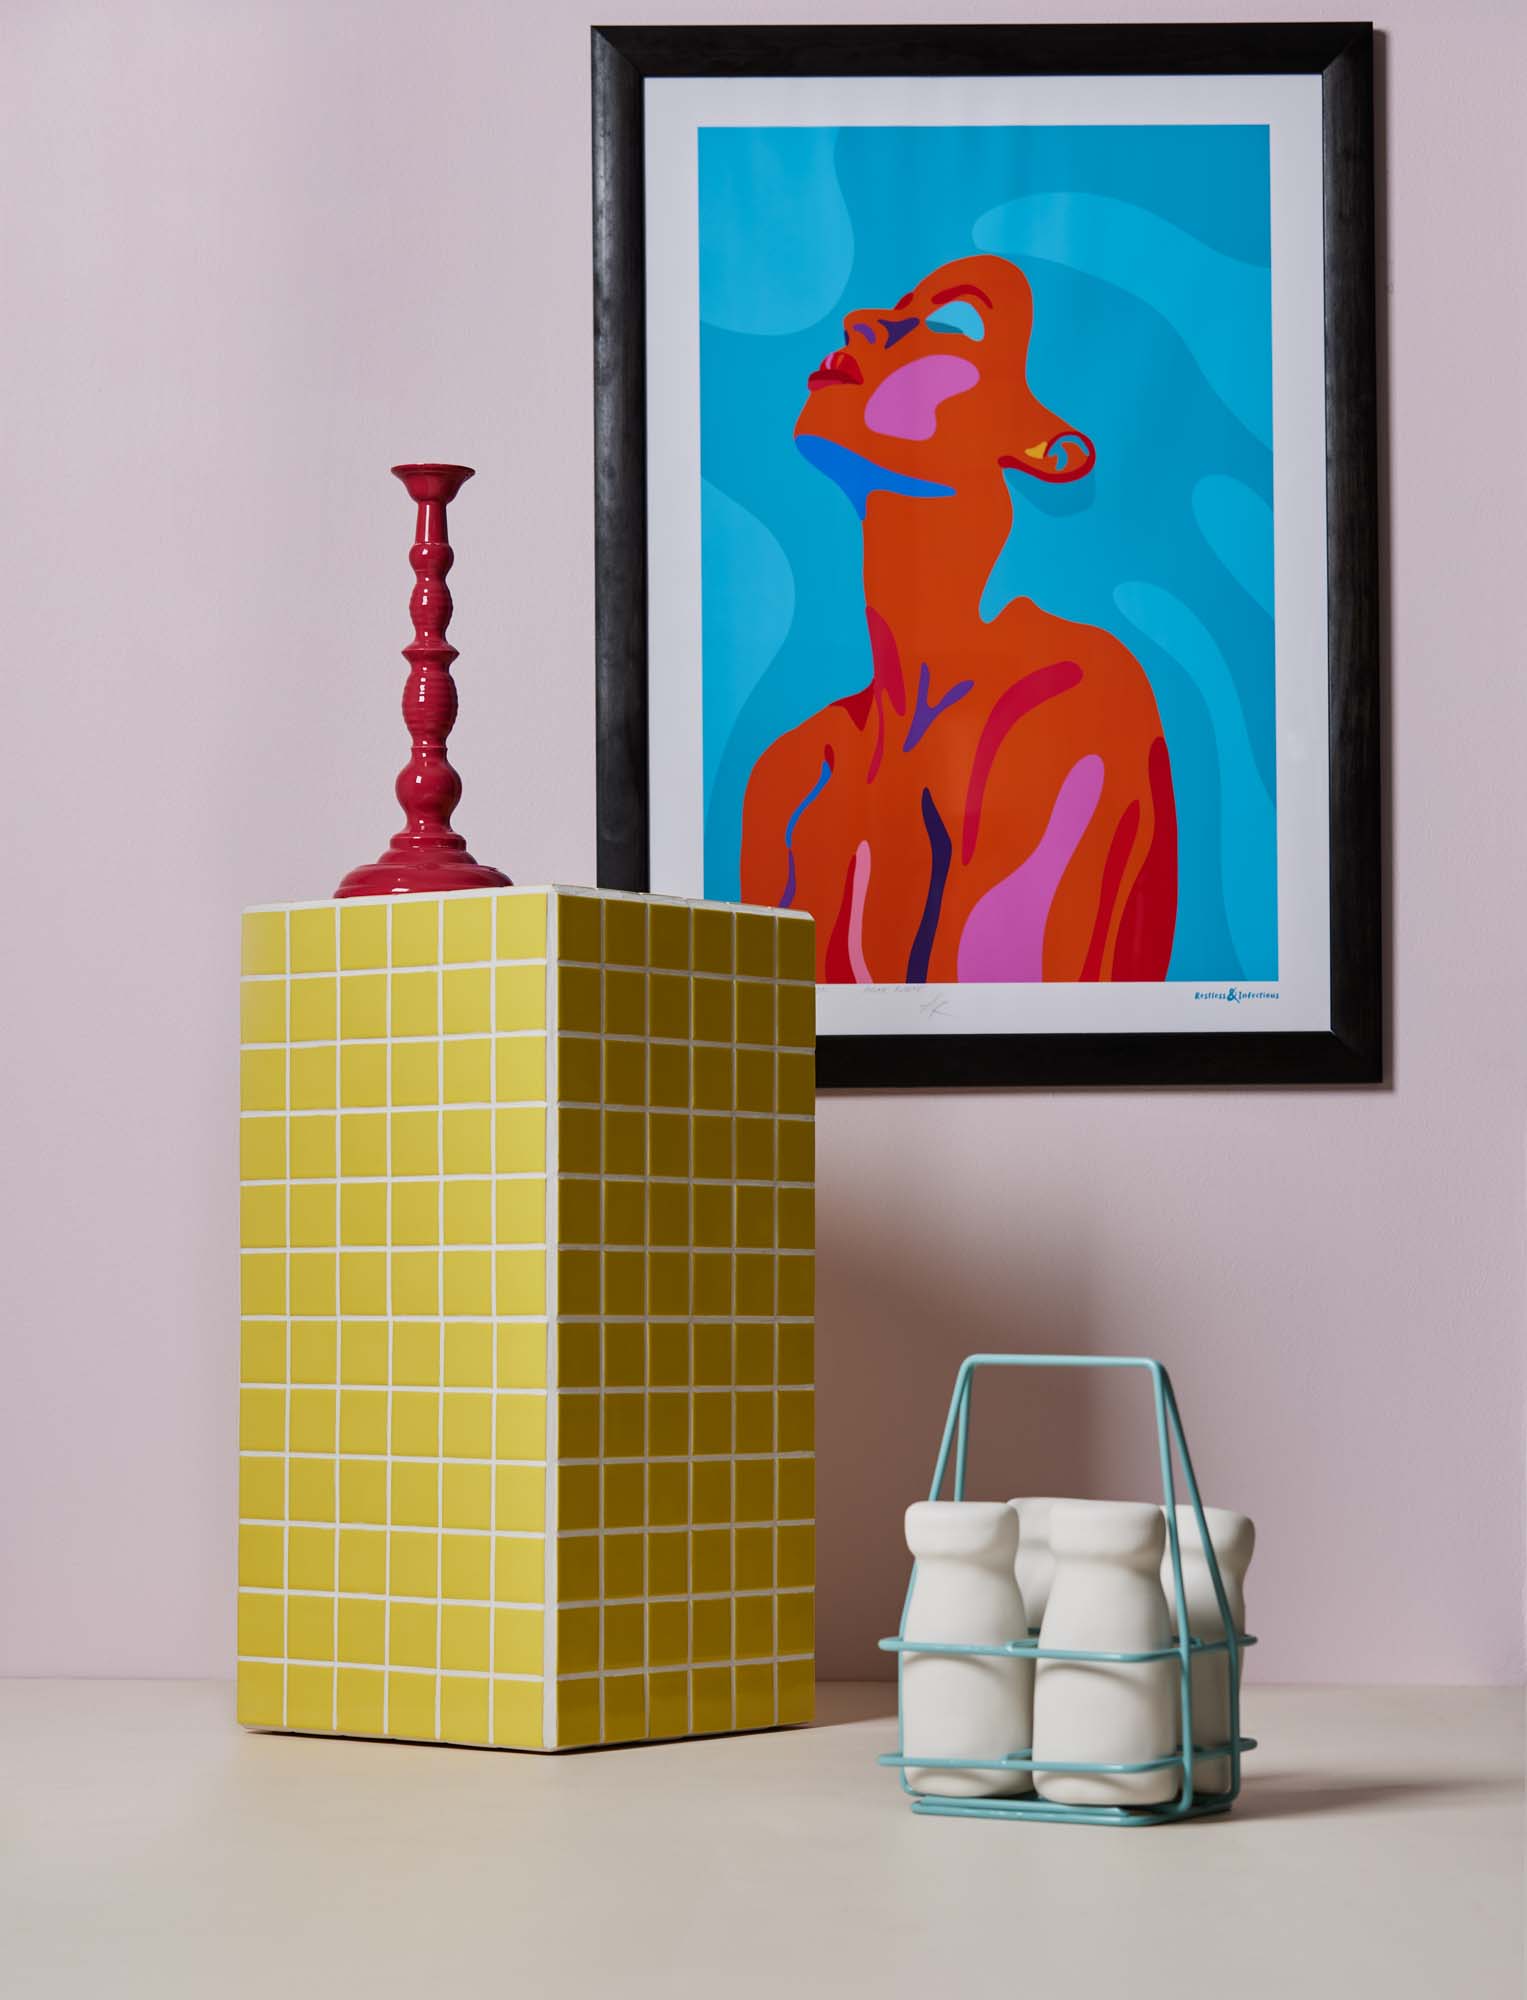 Image with a pale pink wall, a yellow tiled plinth, a candle holder sitting on the plinth, and a milk crate and bottles sculture sitting next to it, a blue and pink painting is on the wall